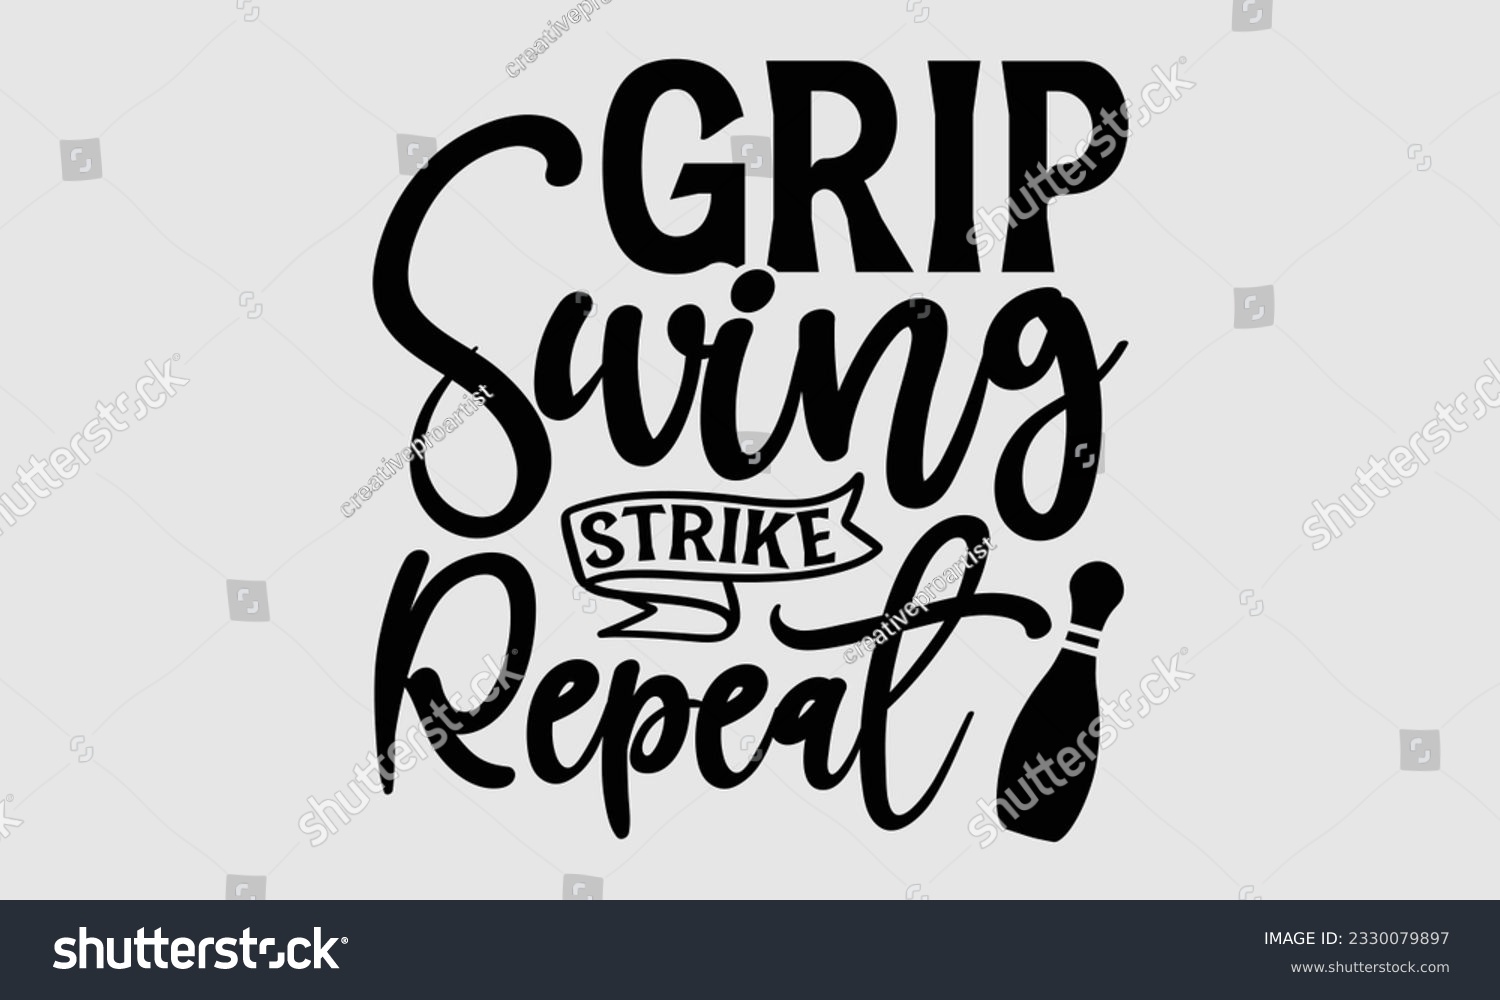 SVG of Grip Swing Strike Repeat- Bowling t-shirt design, Handmade calligraphy vector Illustration for prints on SVG and bags, posters, greeting card template EPS svg